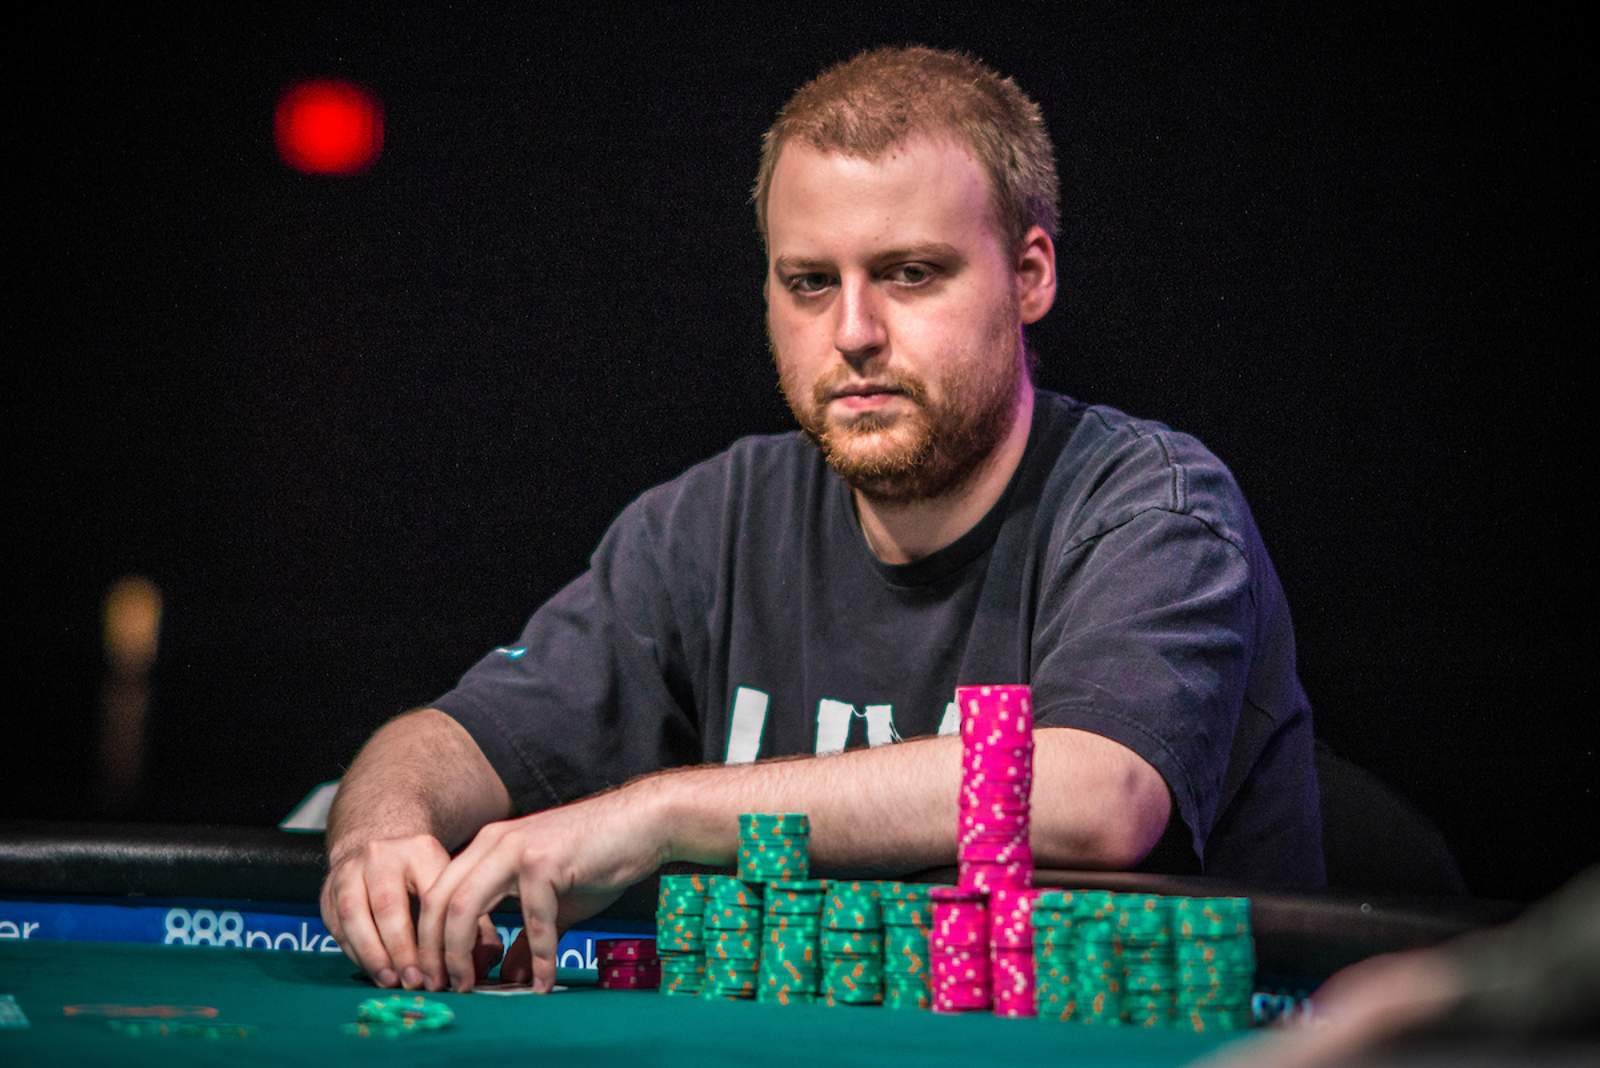 2015 WSOP Main Event: Where Are They Now?